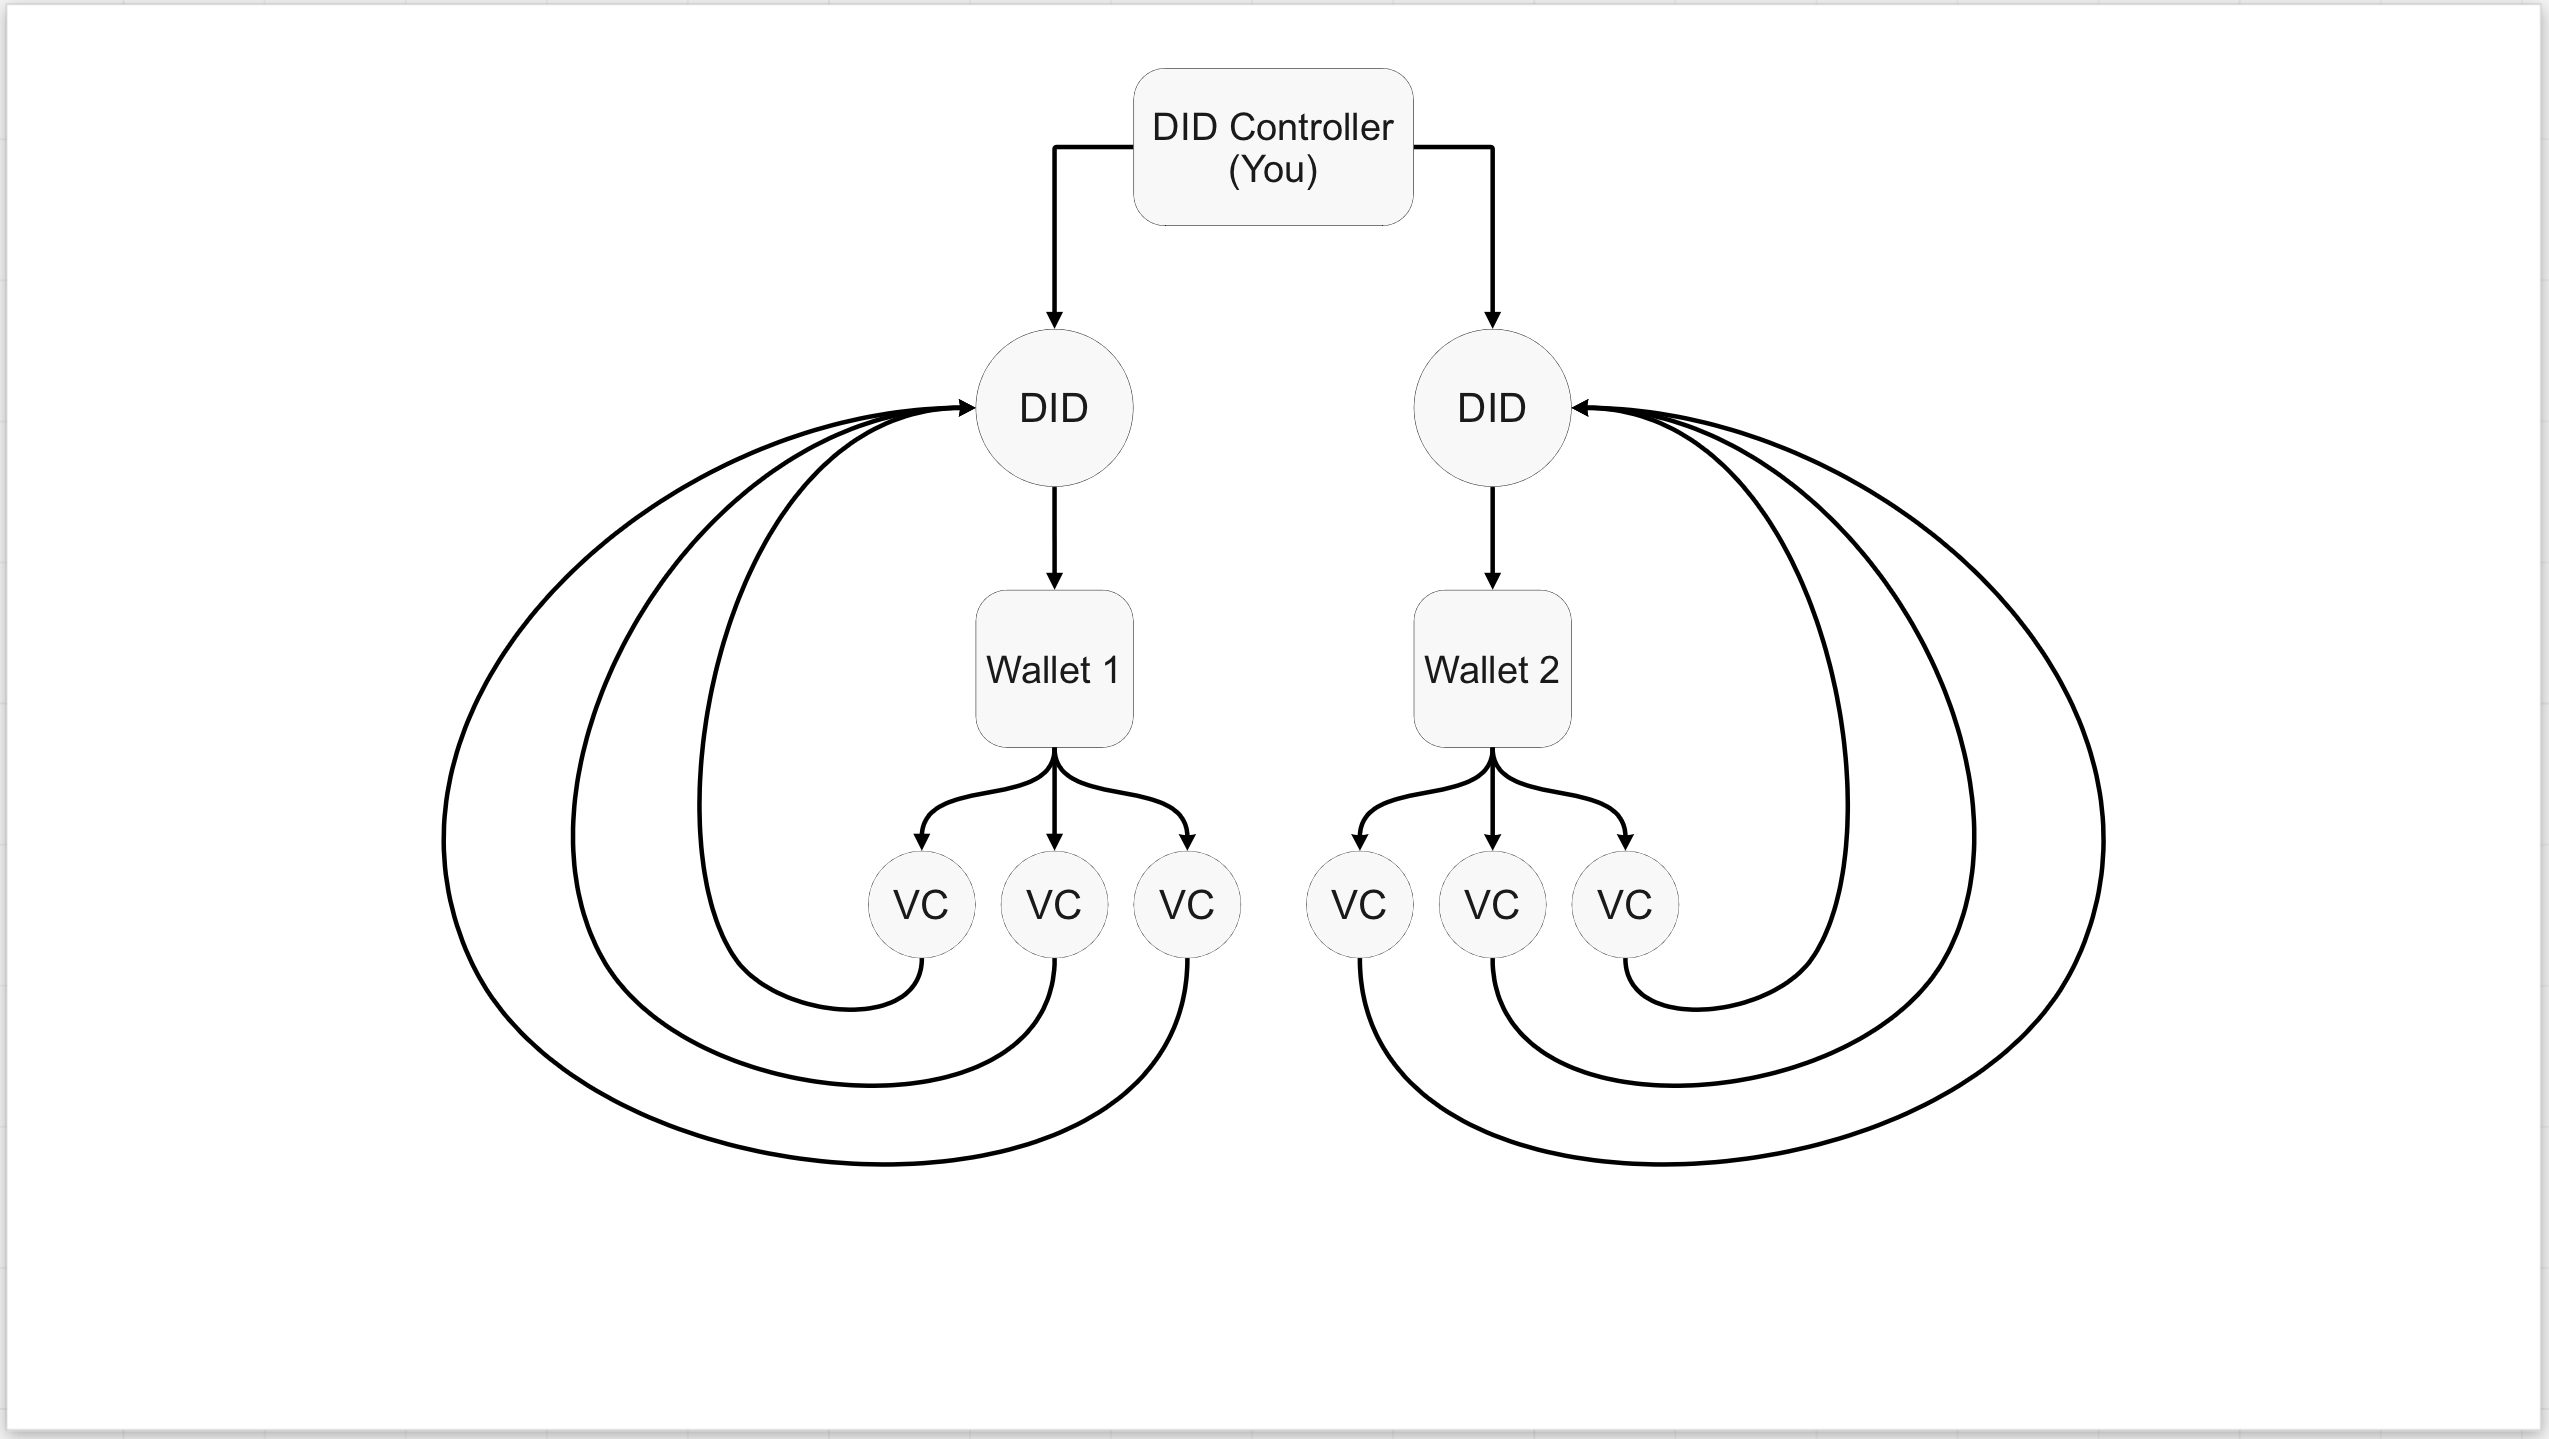 Fig. 2 - DIDs and Multiple Wallets